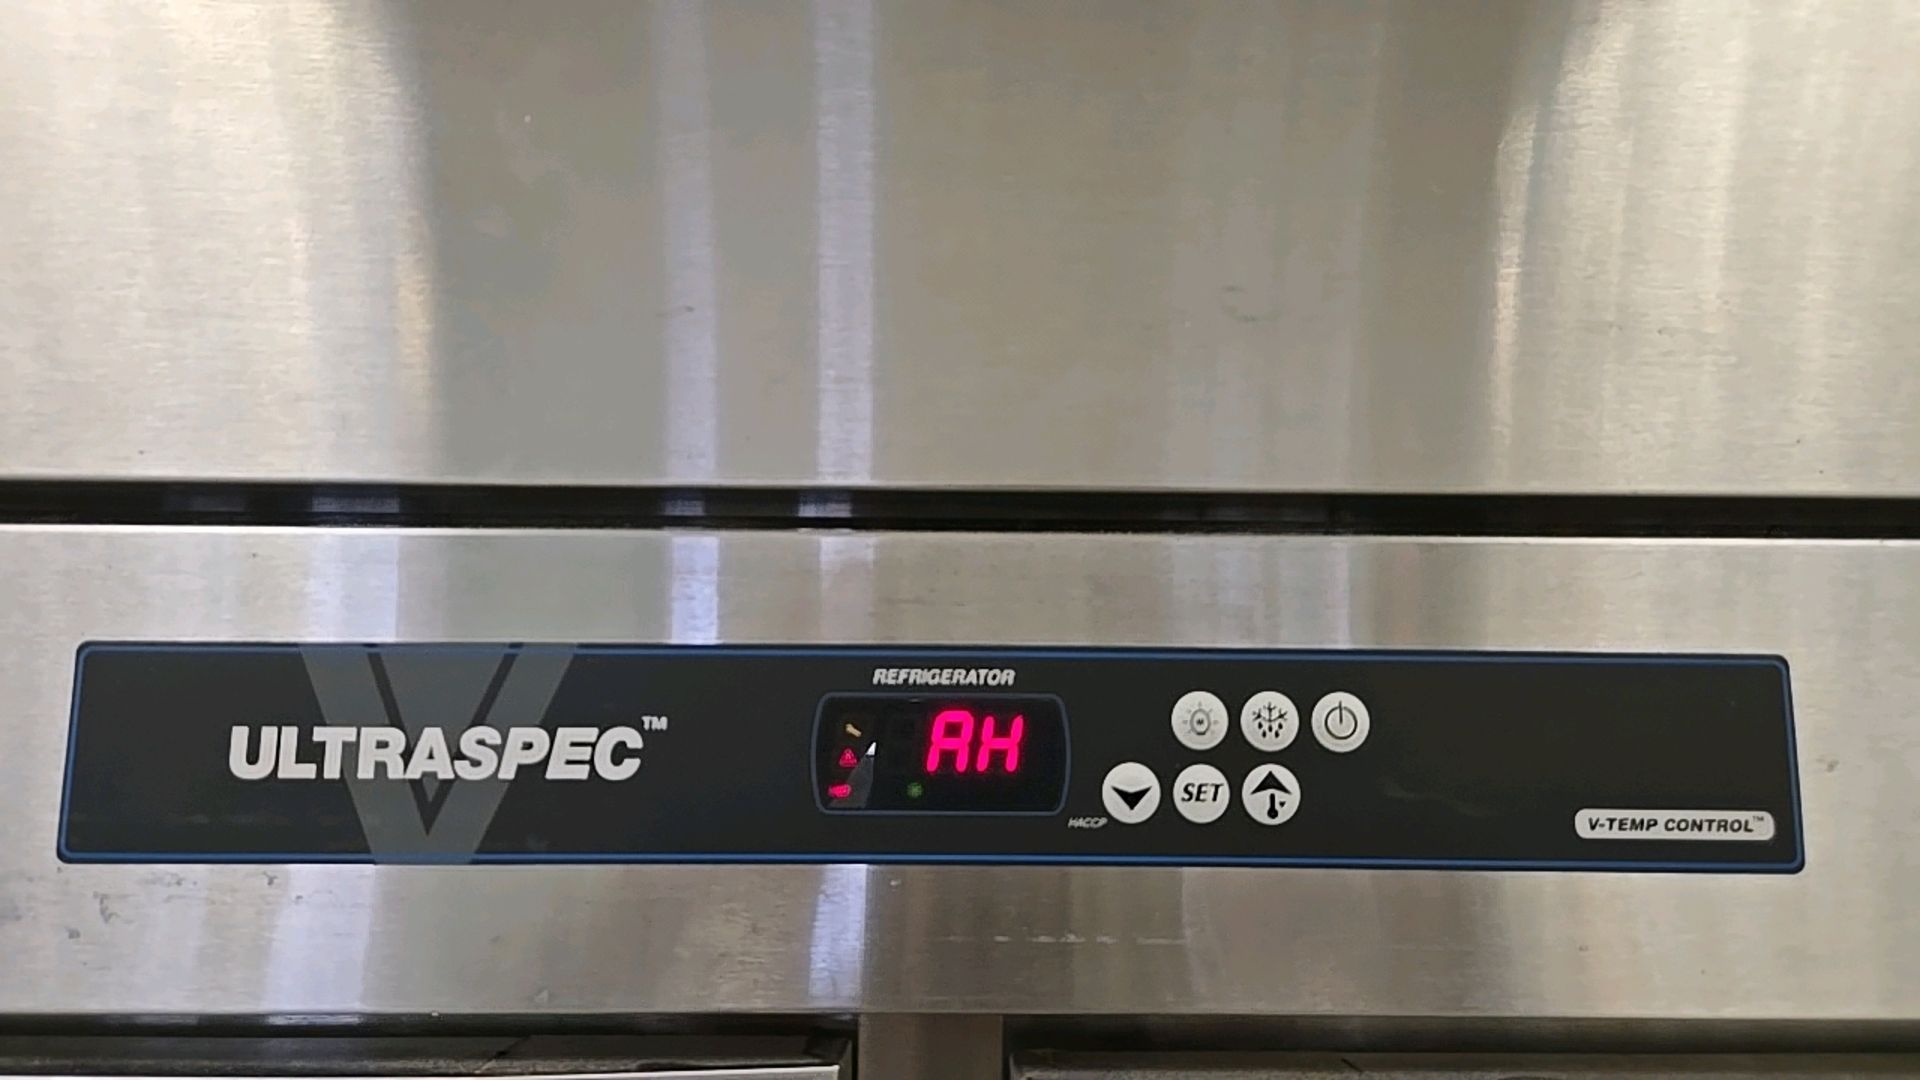 VICTORY ULTRASPEC MODEL NO. RS-2D-S1 TWO-SECTION, FOUR-DOOR REACH-IN REFRIGERATOR WITH V-TEMP - Image 2 of 4